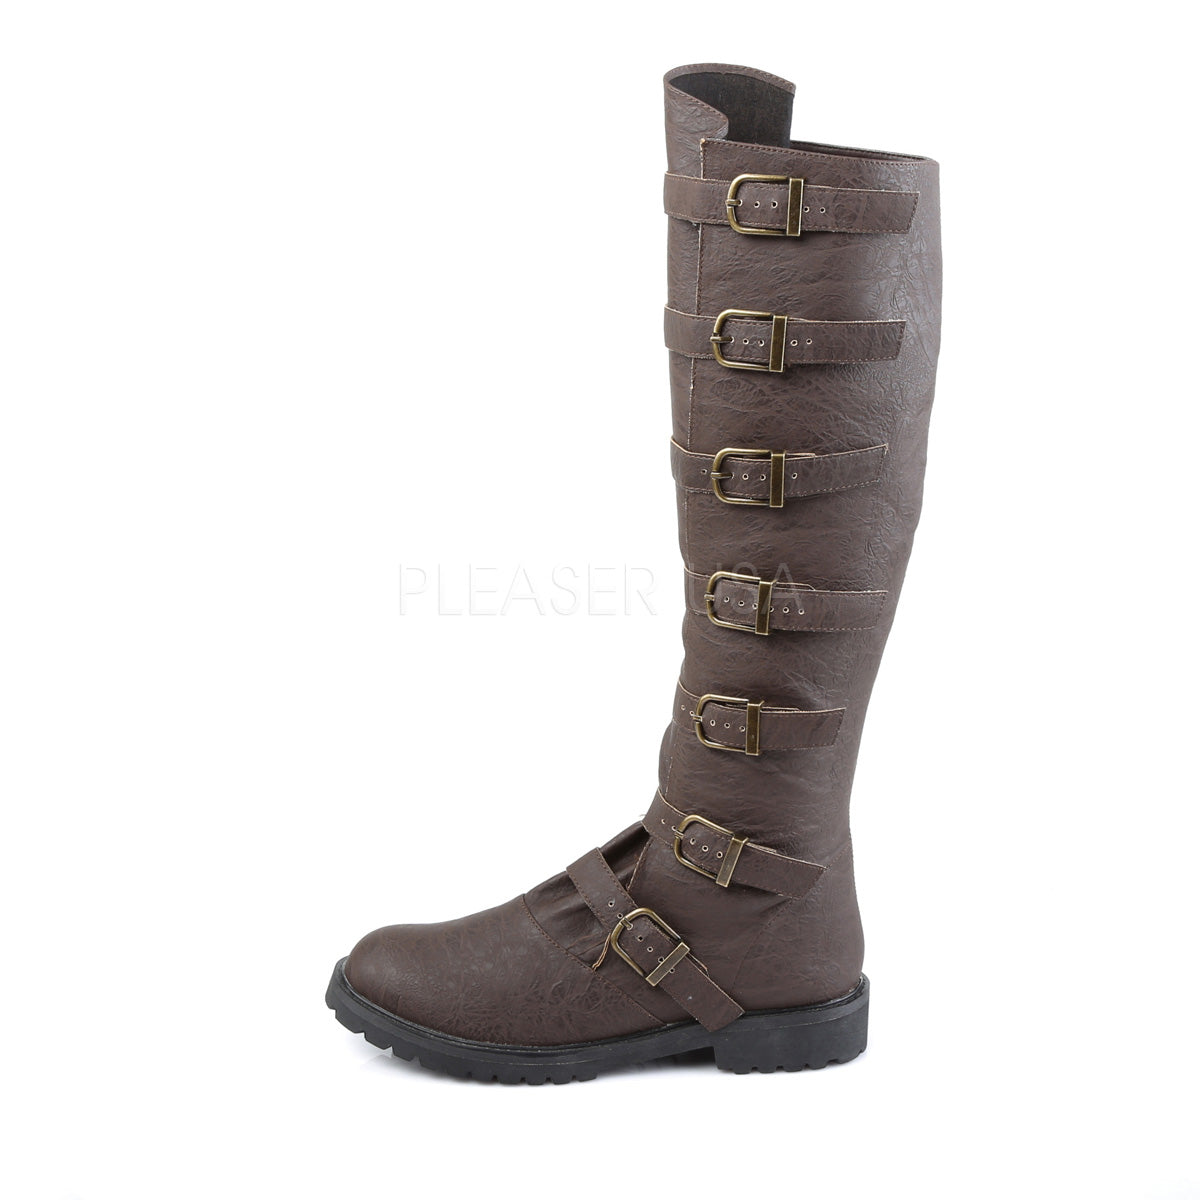 Post Apocalyptic Boots Brown